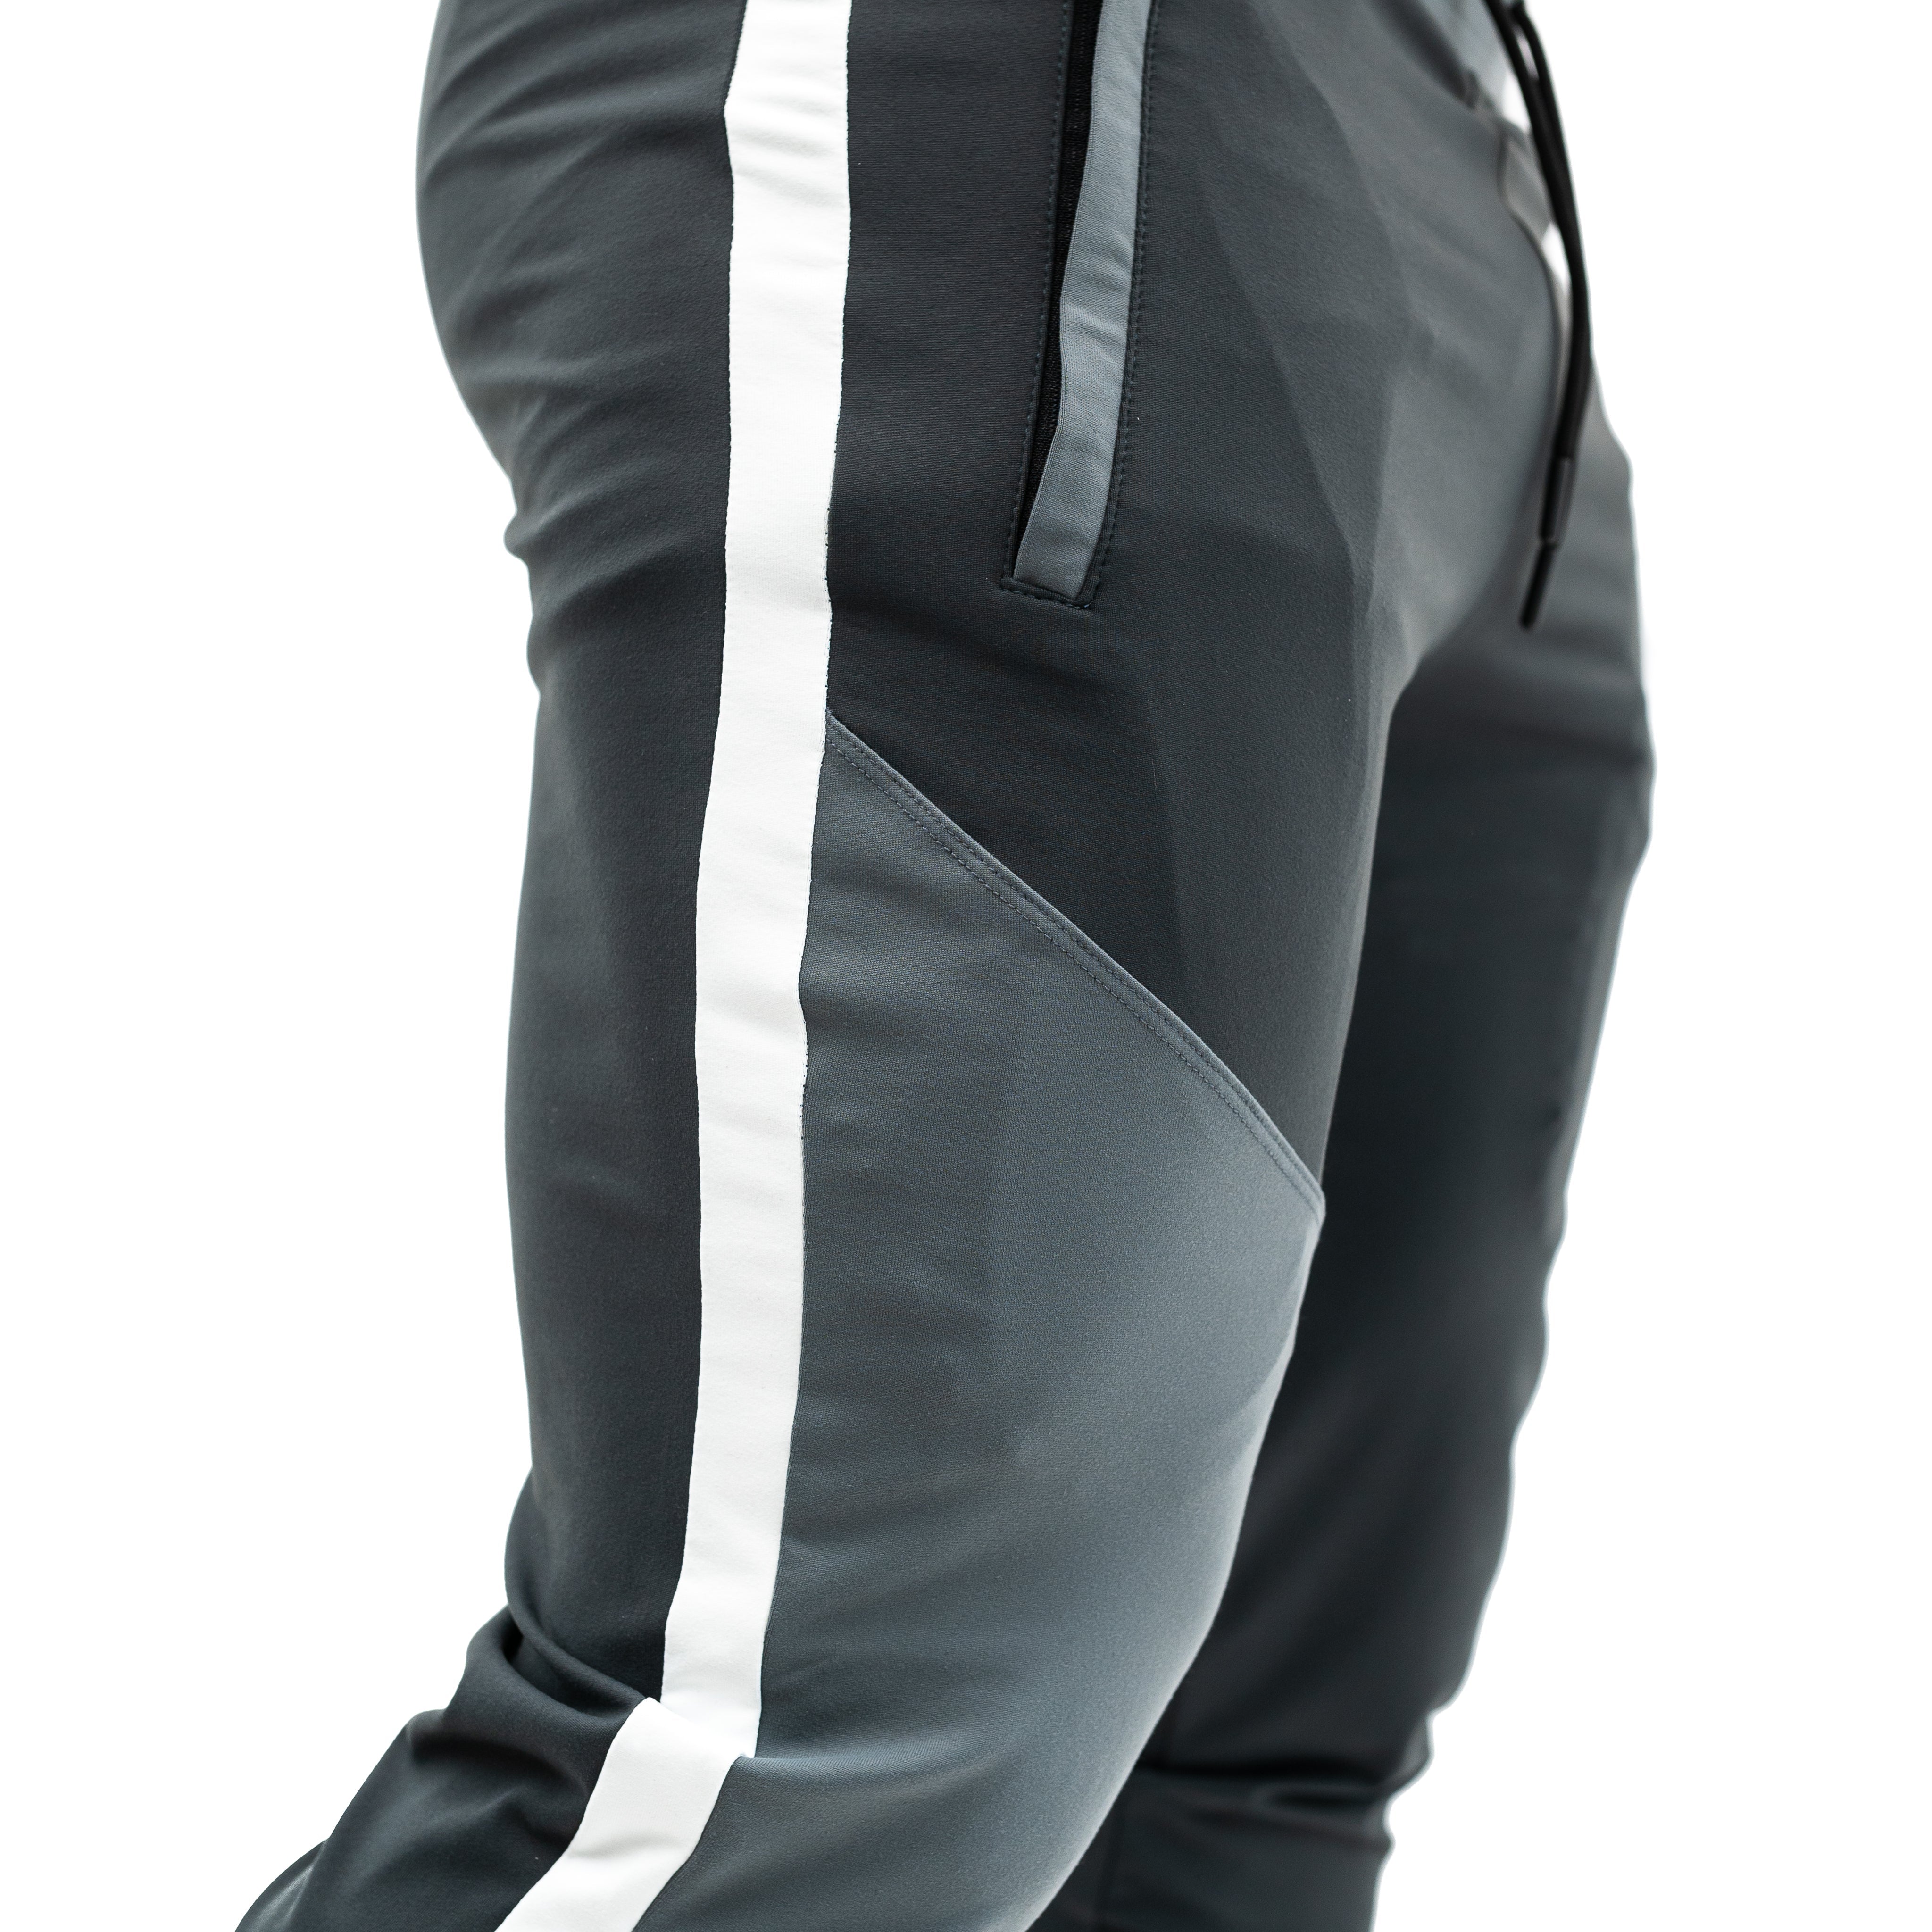 Defy Joggers have likely become a staple in your wardrobe. With our newest chromium design colourway we set out to provide a unique yet simple chromium colour combo to match with all the stealth, grey, white and even more poppy colours of your current collection or many of the pieces we have available. You can purchase chromium defy joggers from A7 UK or A7 Europe. A7 UK shipping to UK, Ireland, France, Italy, Germany, the Netherlands, Sweden and Poland.